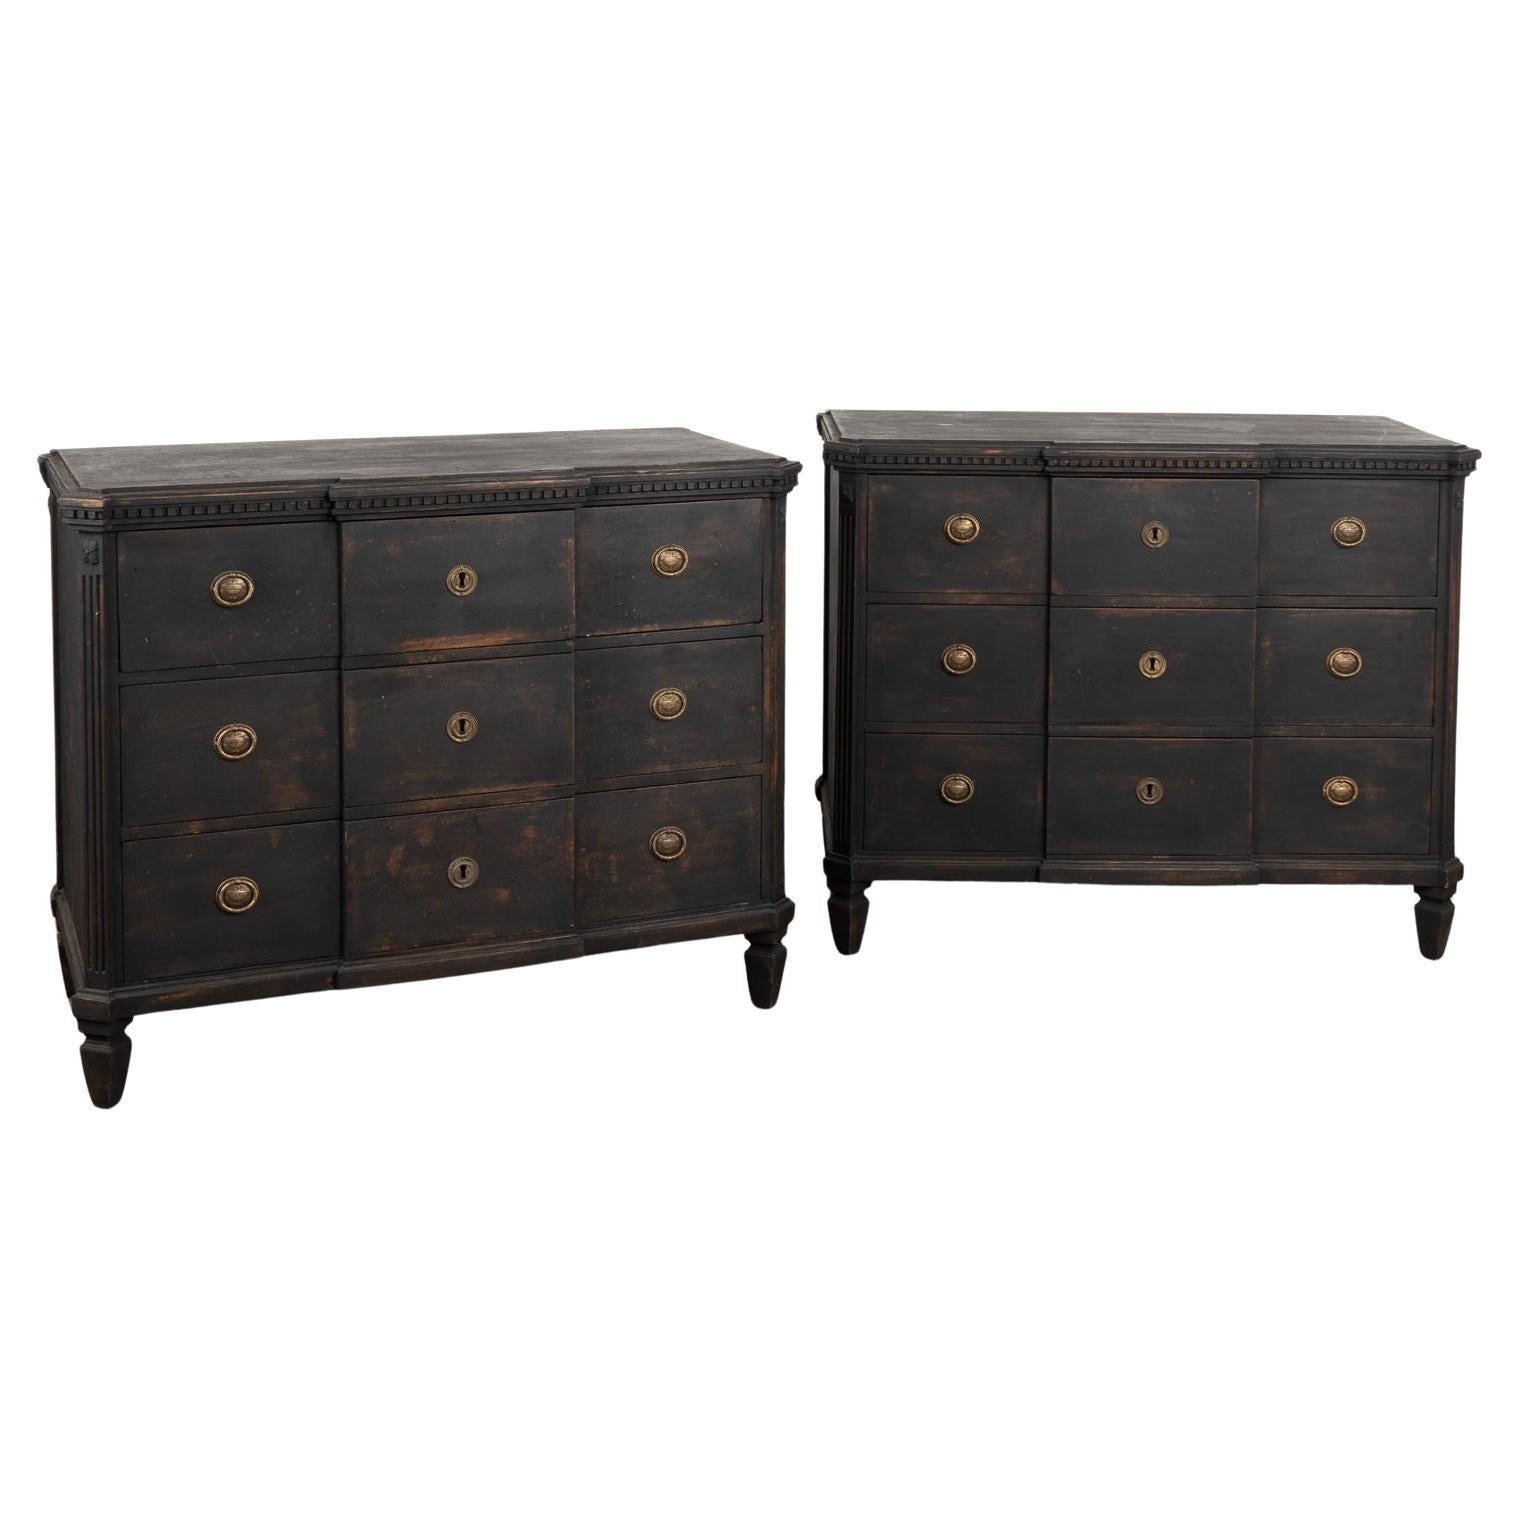 Pair, Black Painted Chest of Drawers, Sweden circa 1860-80